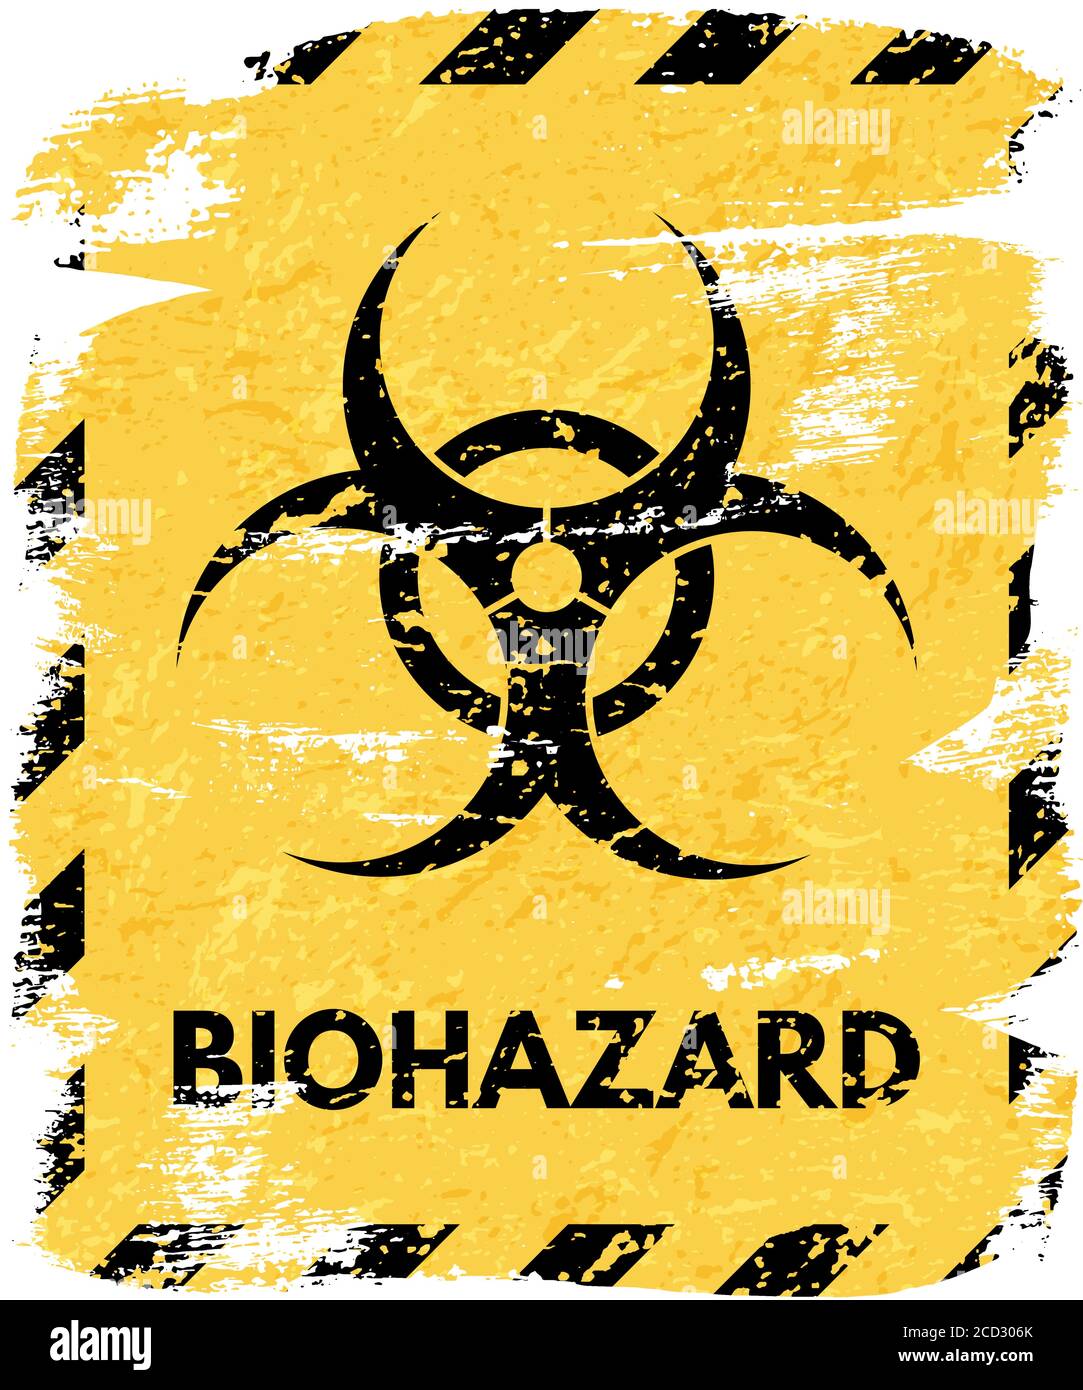 Black grunge biohazard sign isolated on yellow background and striped border. Vector design element. Stock Vector